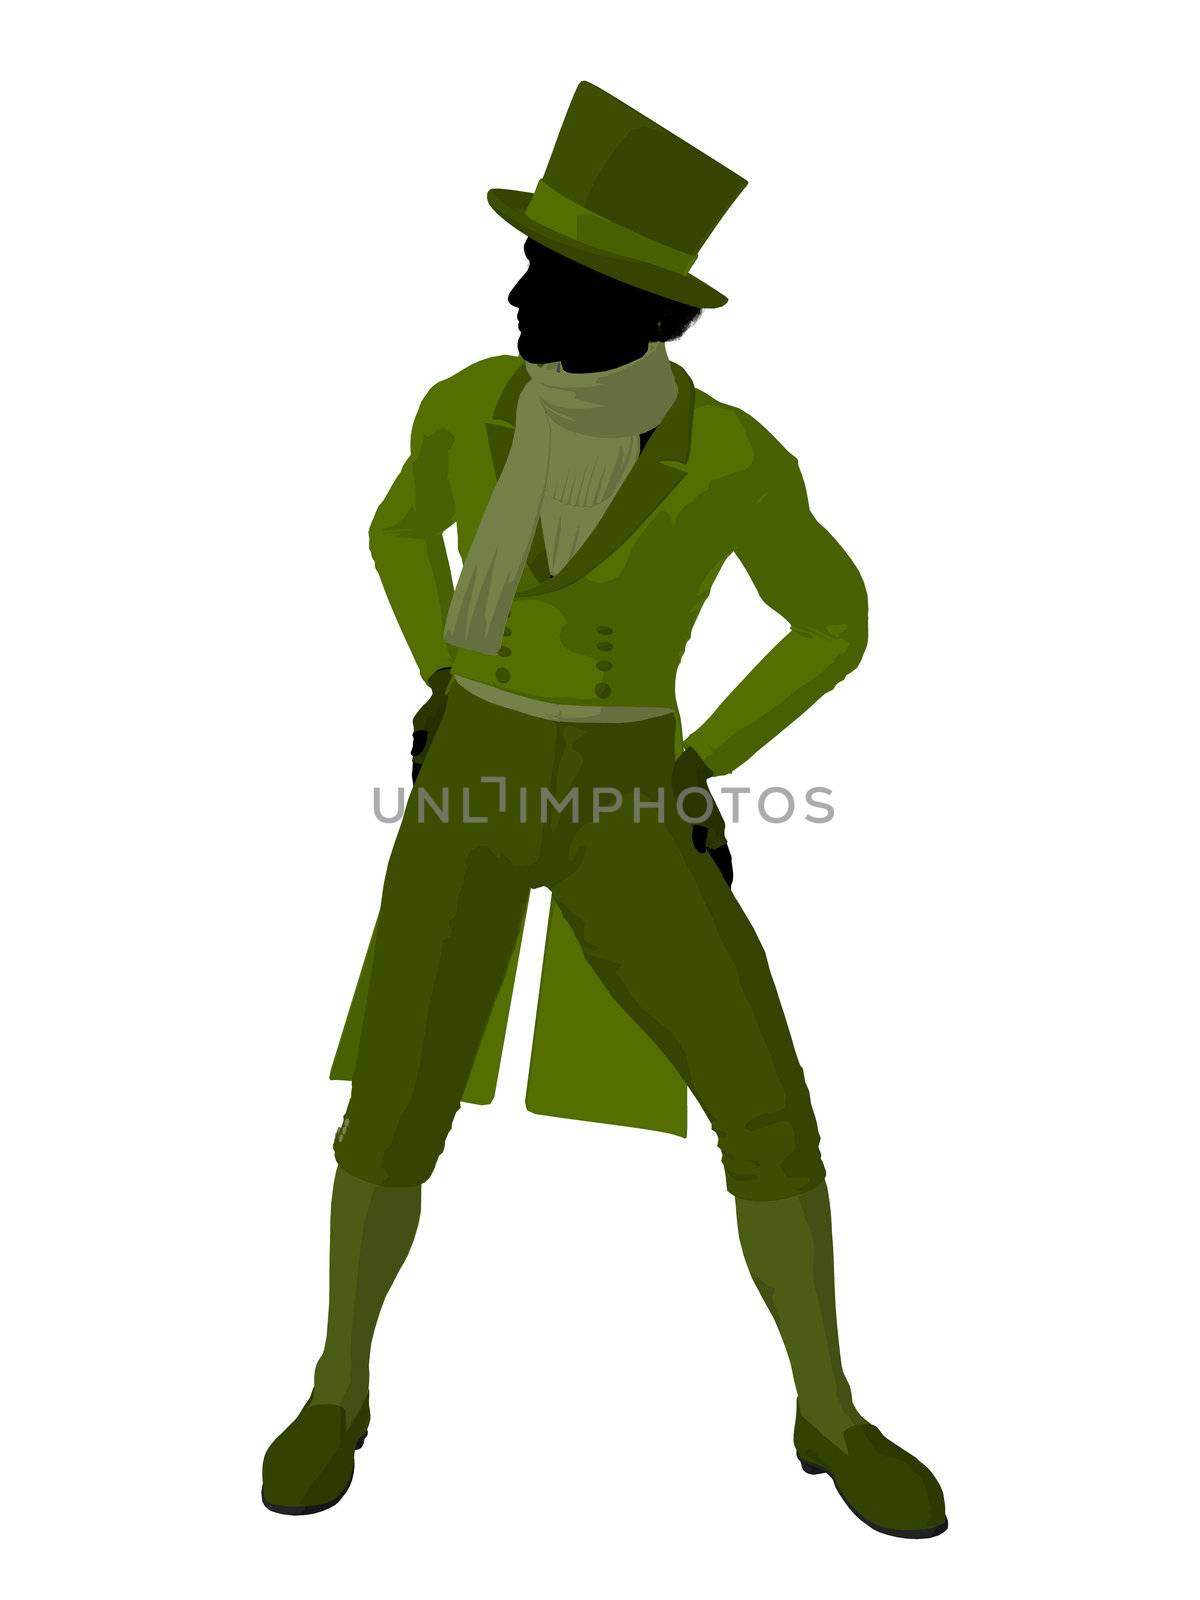 African American Victorian Man Illustration Silhouette by kathygold